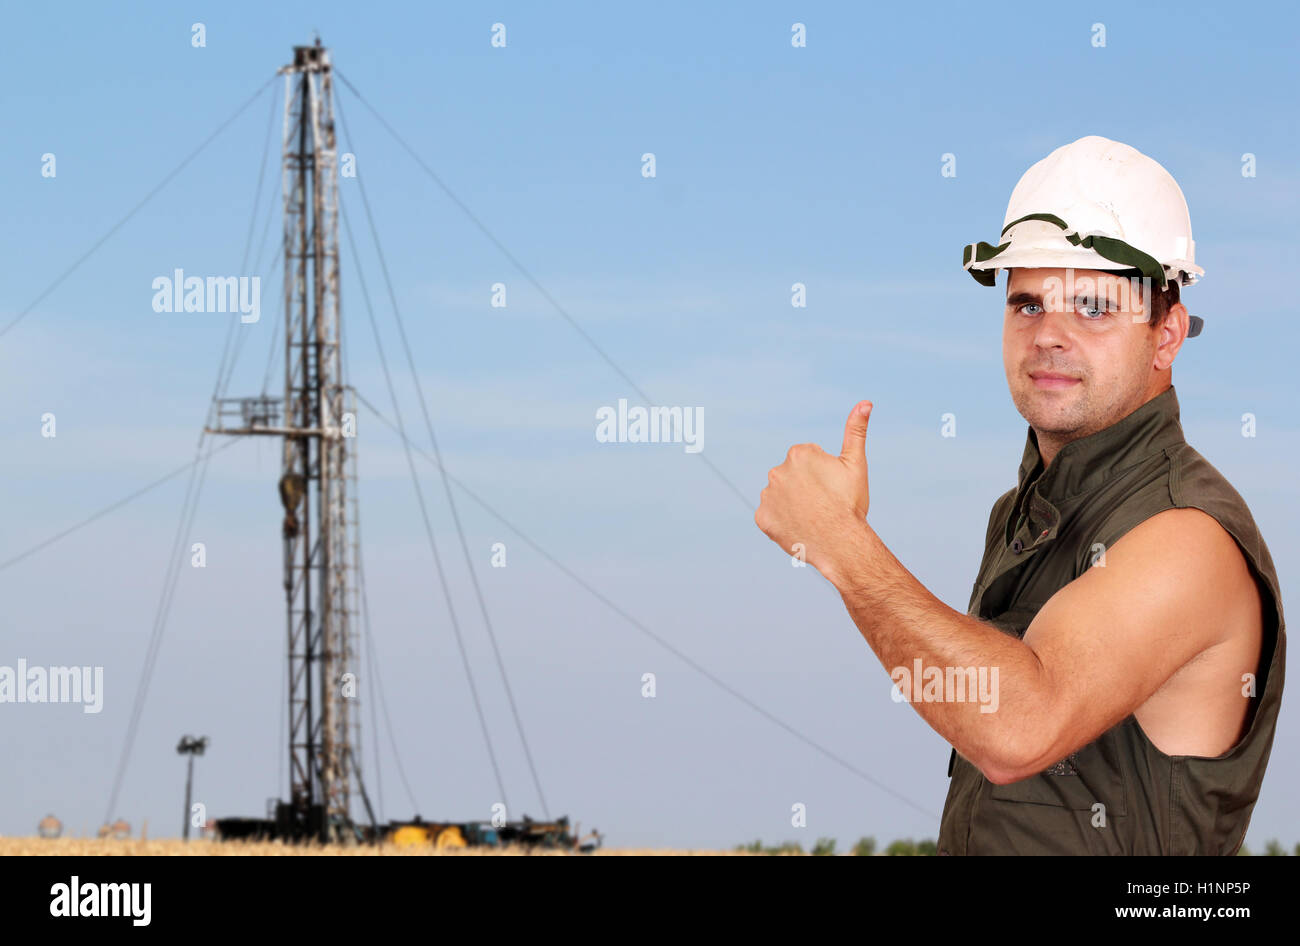 oil worker with thumb up Stock Photo